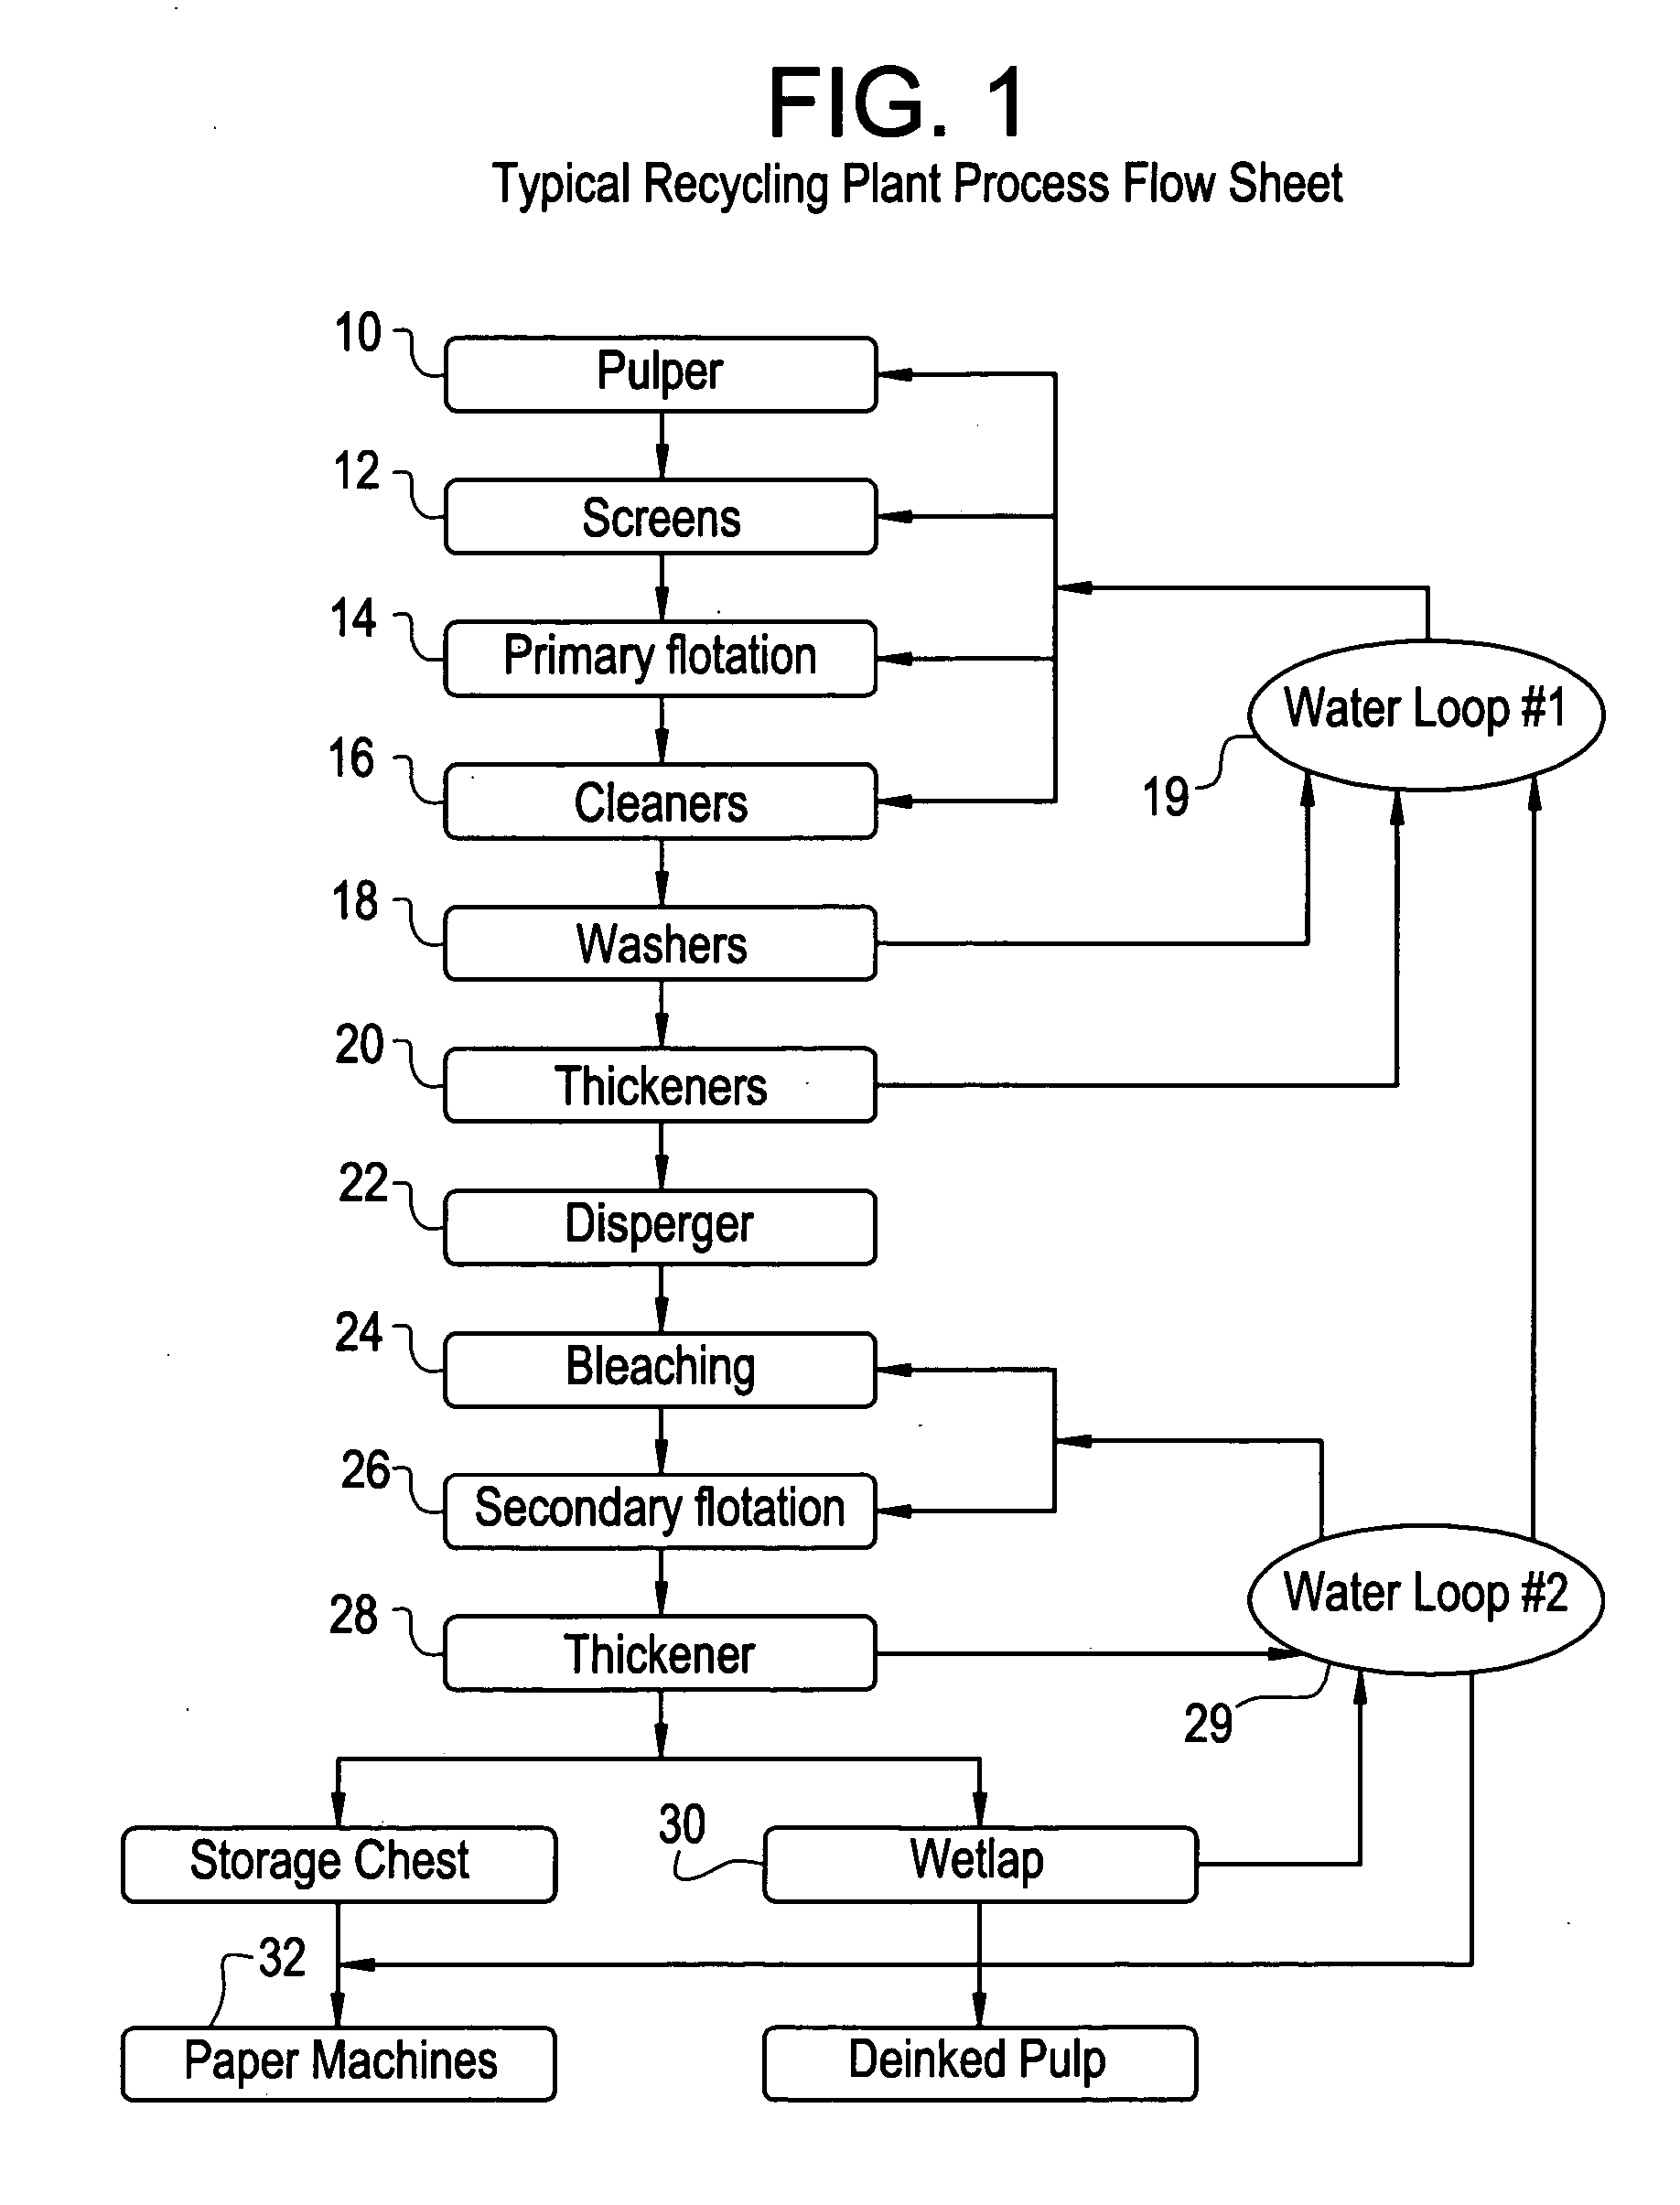 System for control of stickies in recovered and virgin paper processing